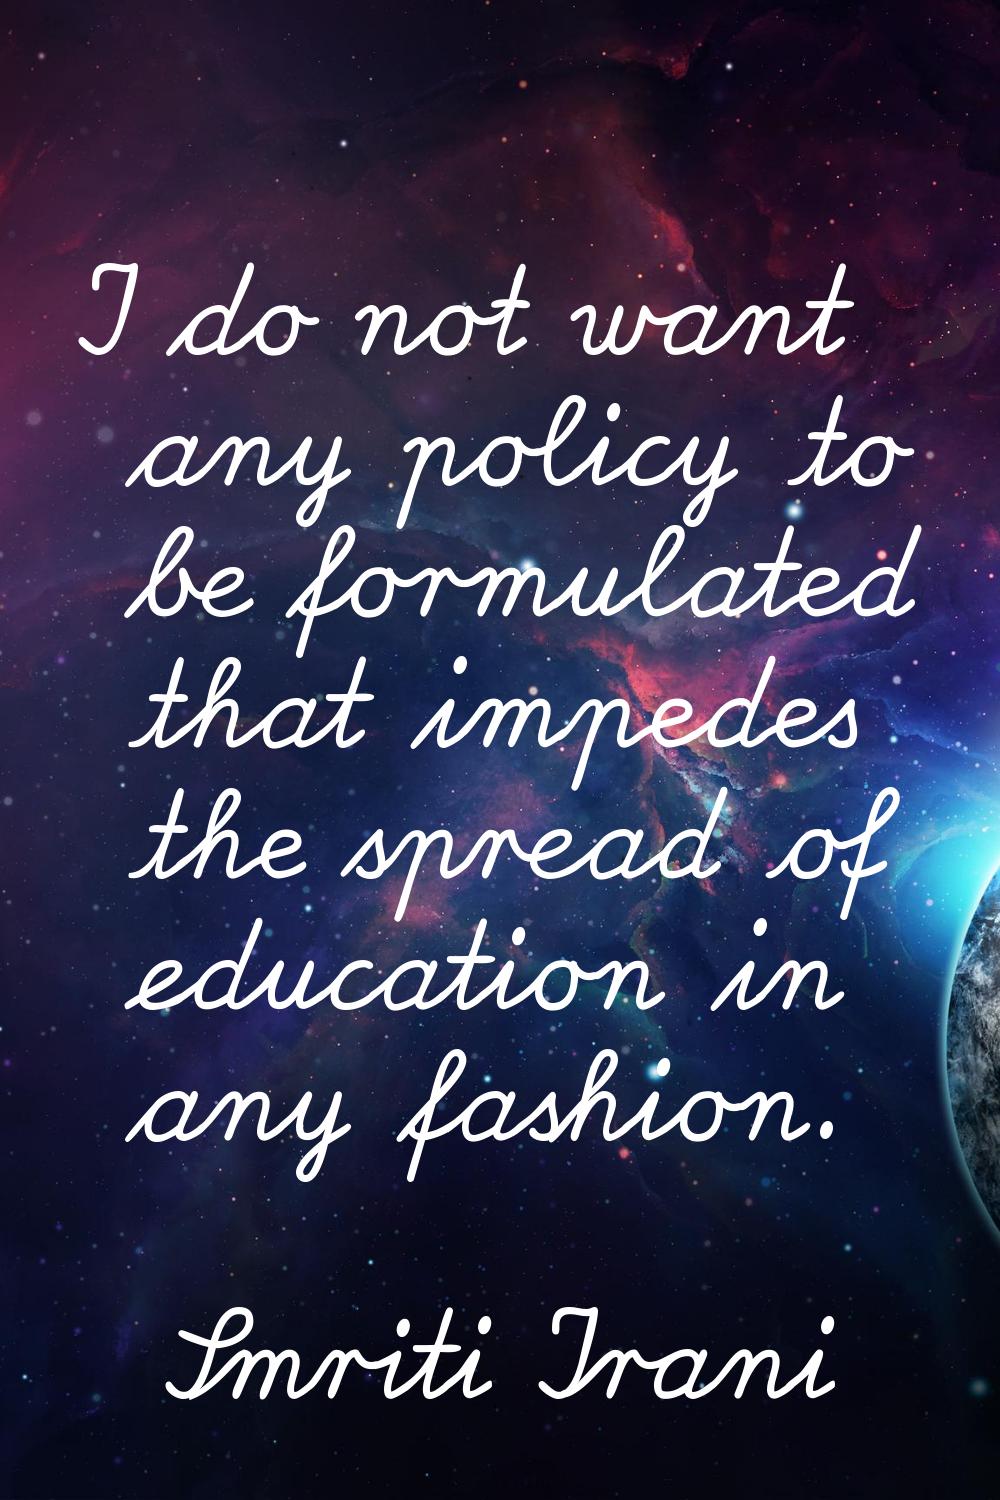 I do not want any policy to be formulated that impedes the spread of education in any fashion.